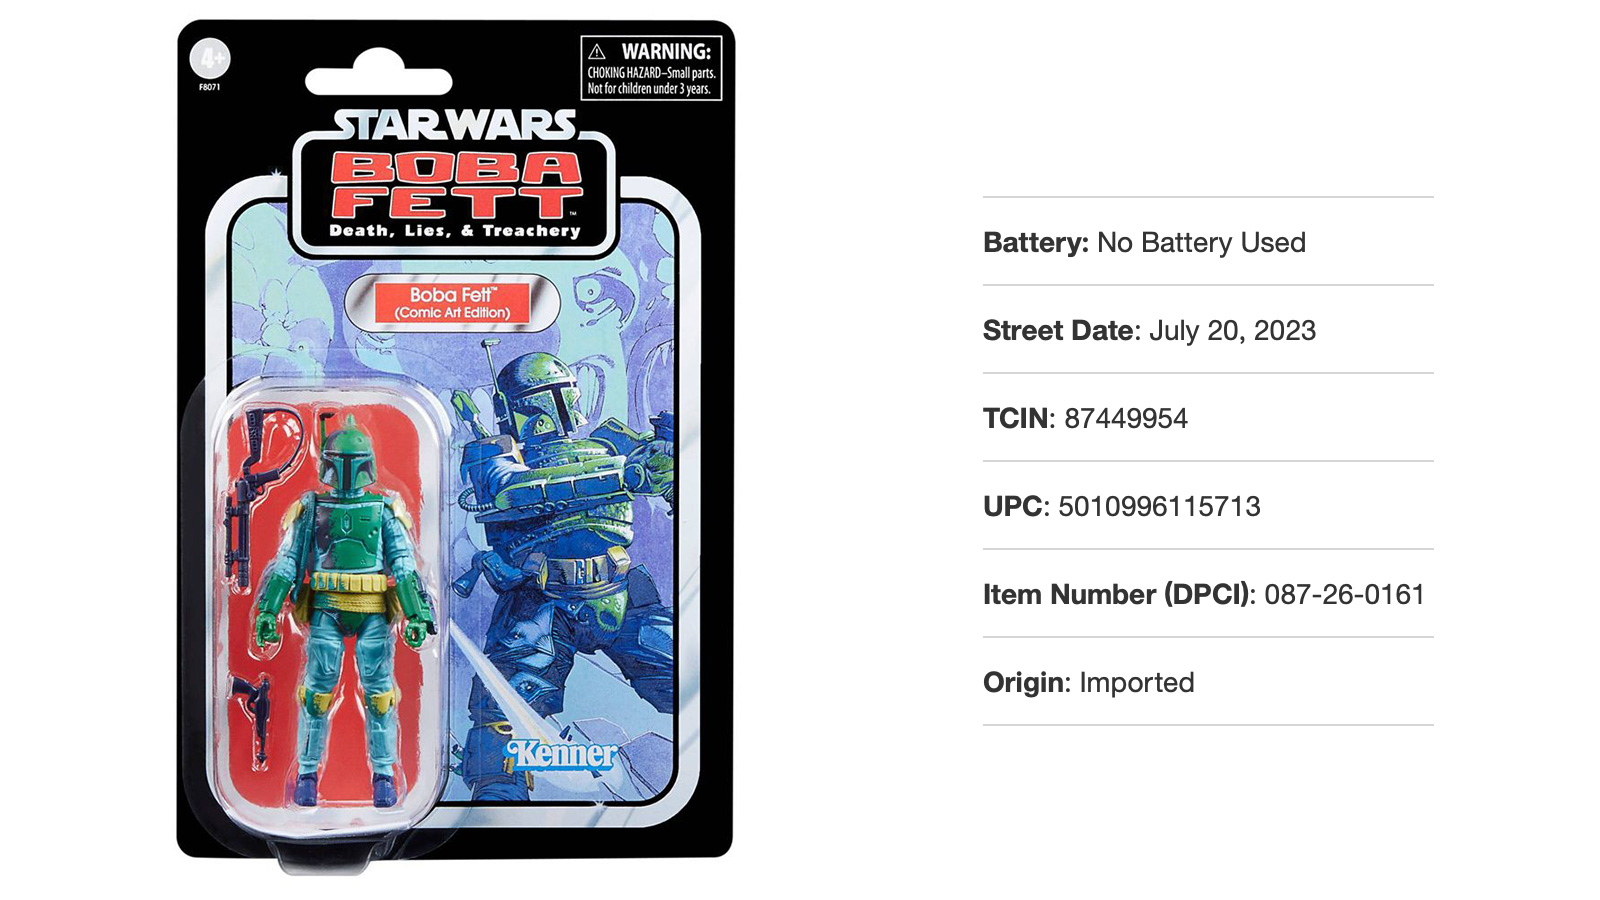 Street Date For Target Exclusive TVC 3.75-Inch Boba Fett (Comic Art Edition) Is Today 7/20/23